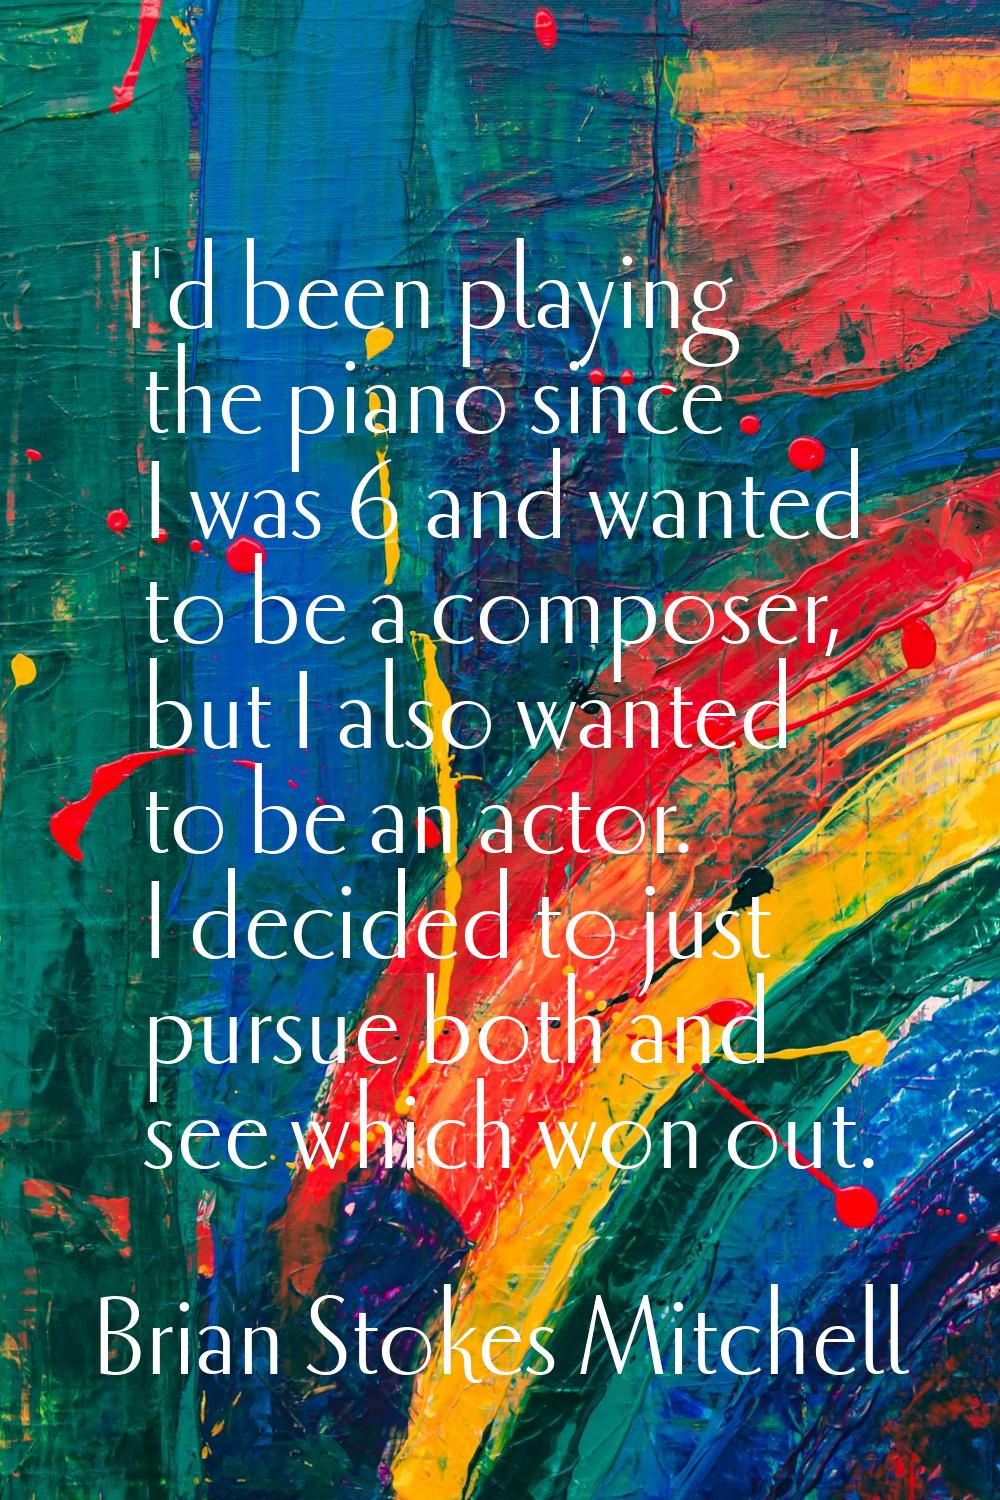 I'd been playing the piano since I was 6 and wanted to be a composer, but I also wanted to be an ac